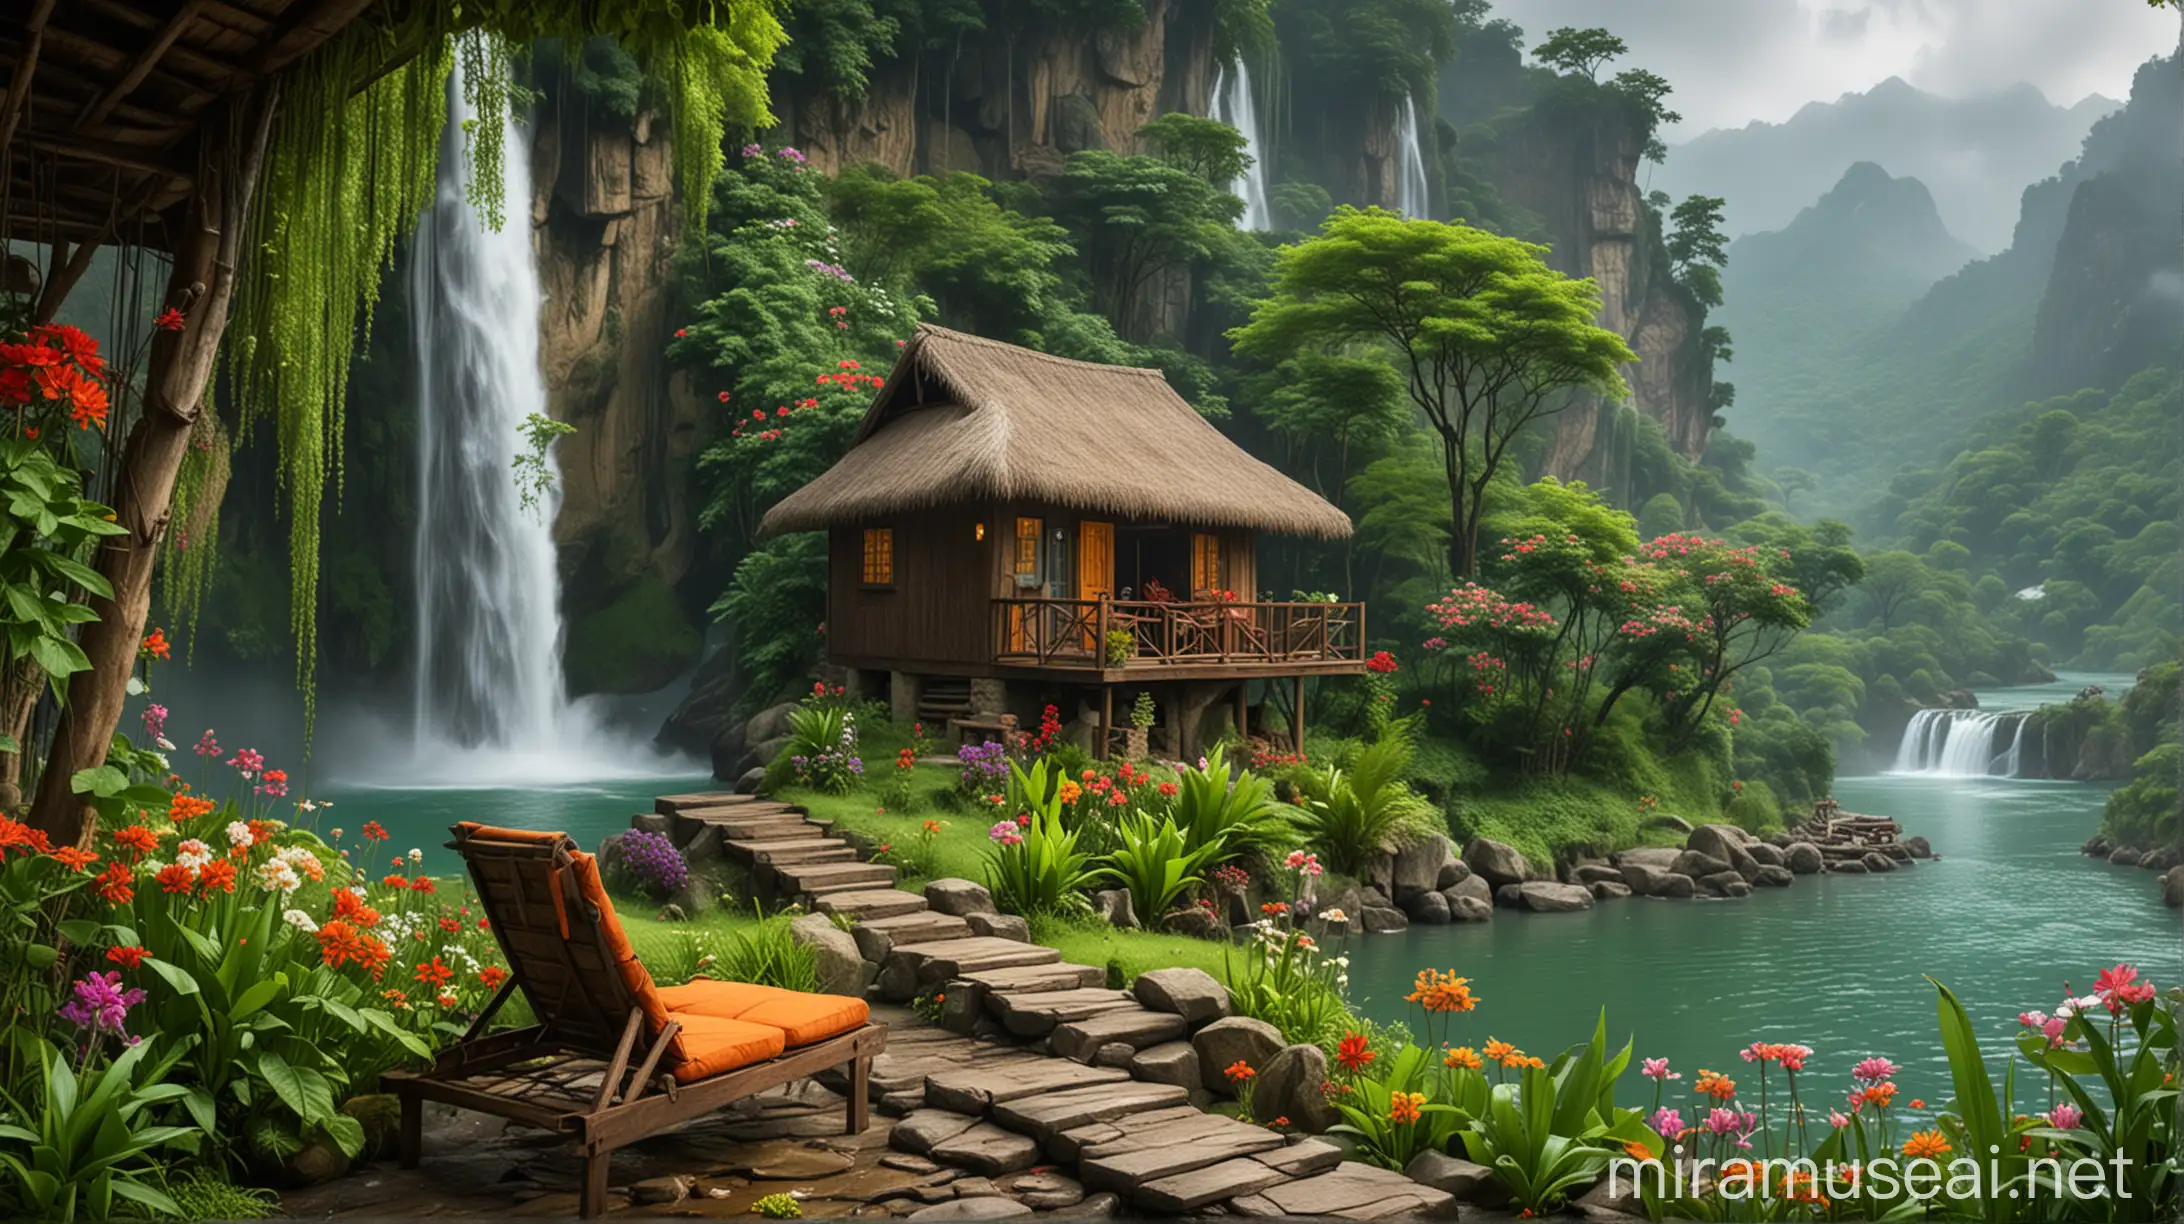 Monsoon House Mountain Landscape with Waterfall and Sitting Chairs